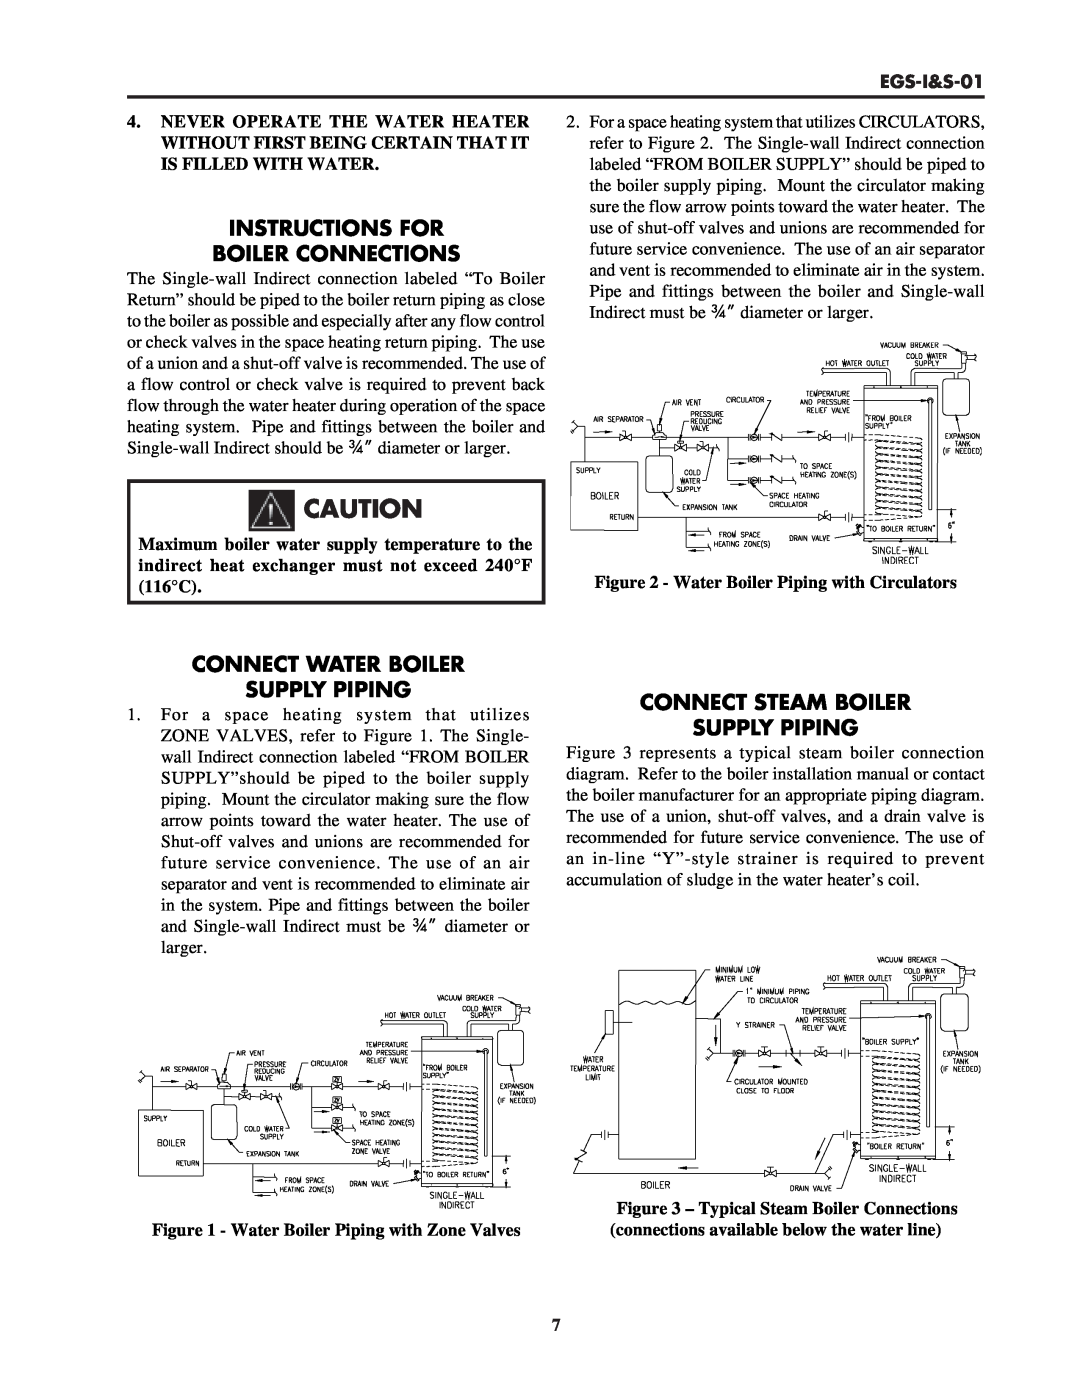 Lochinvar EGS-I&S-01 service manual Instructions For Boiler Connections, Connect Water Boiler Supply Piping 